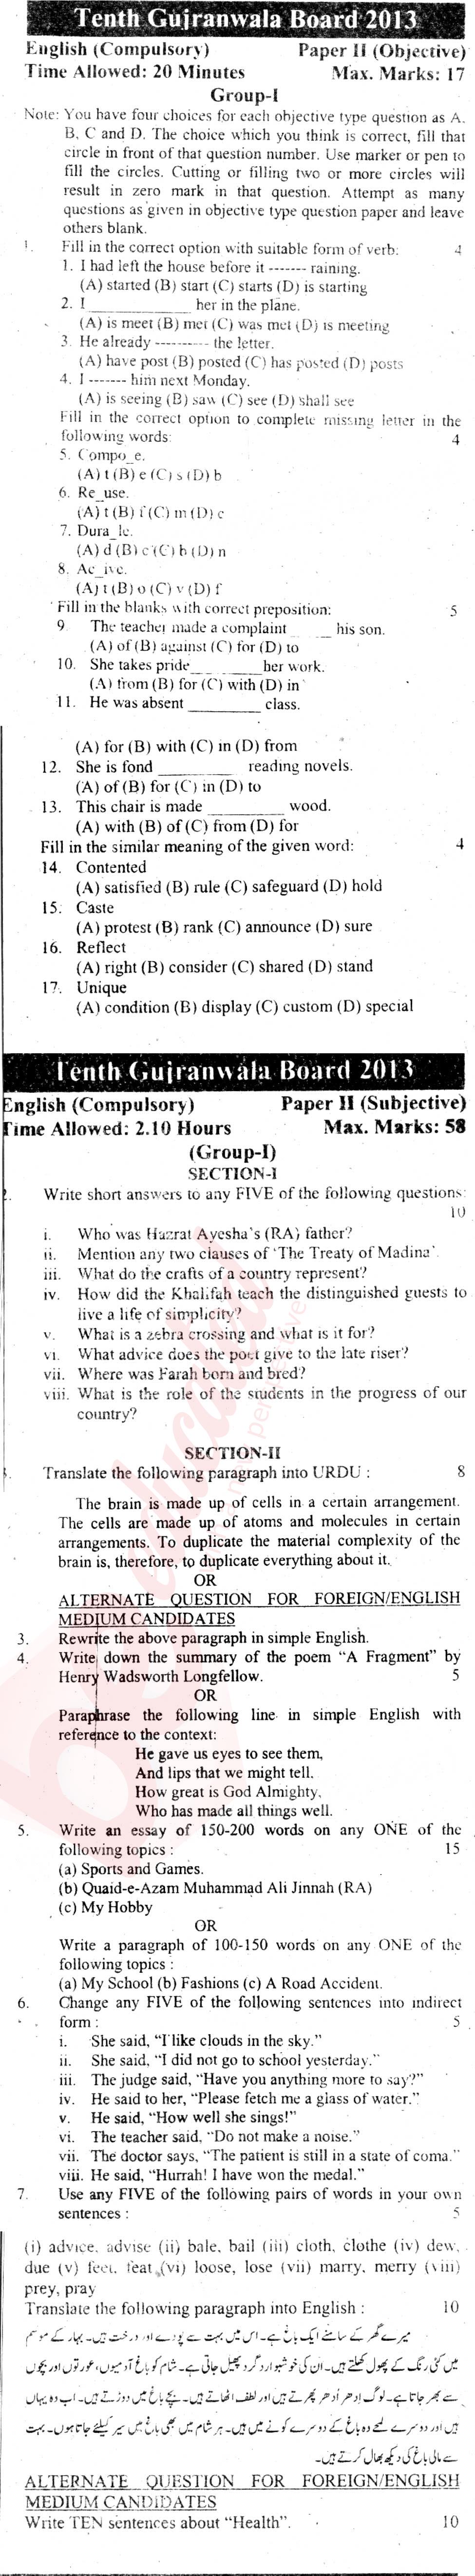 English 10th class Past Paper Group 1 BISE Gujranwala 2013